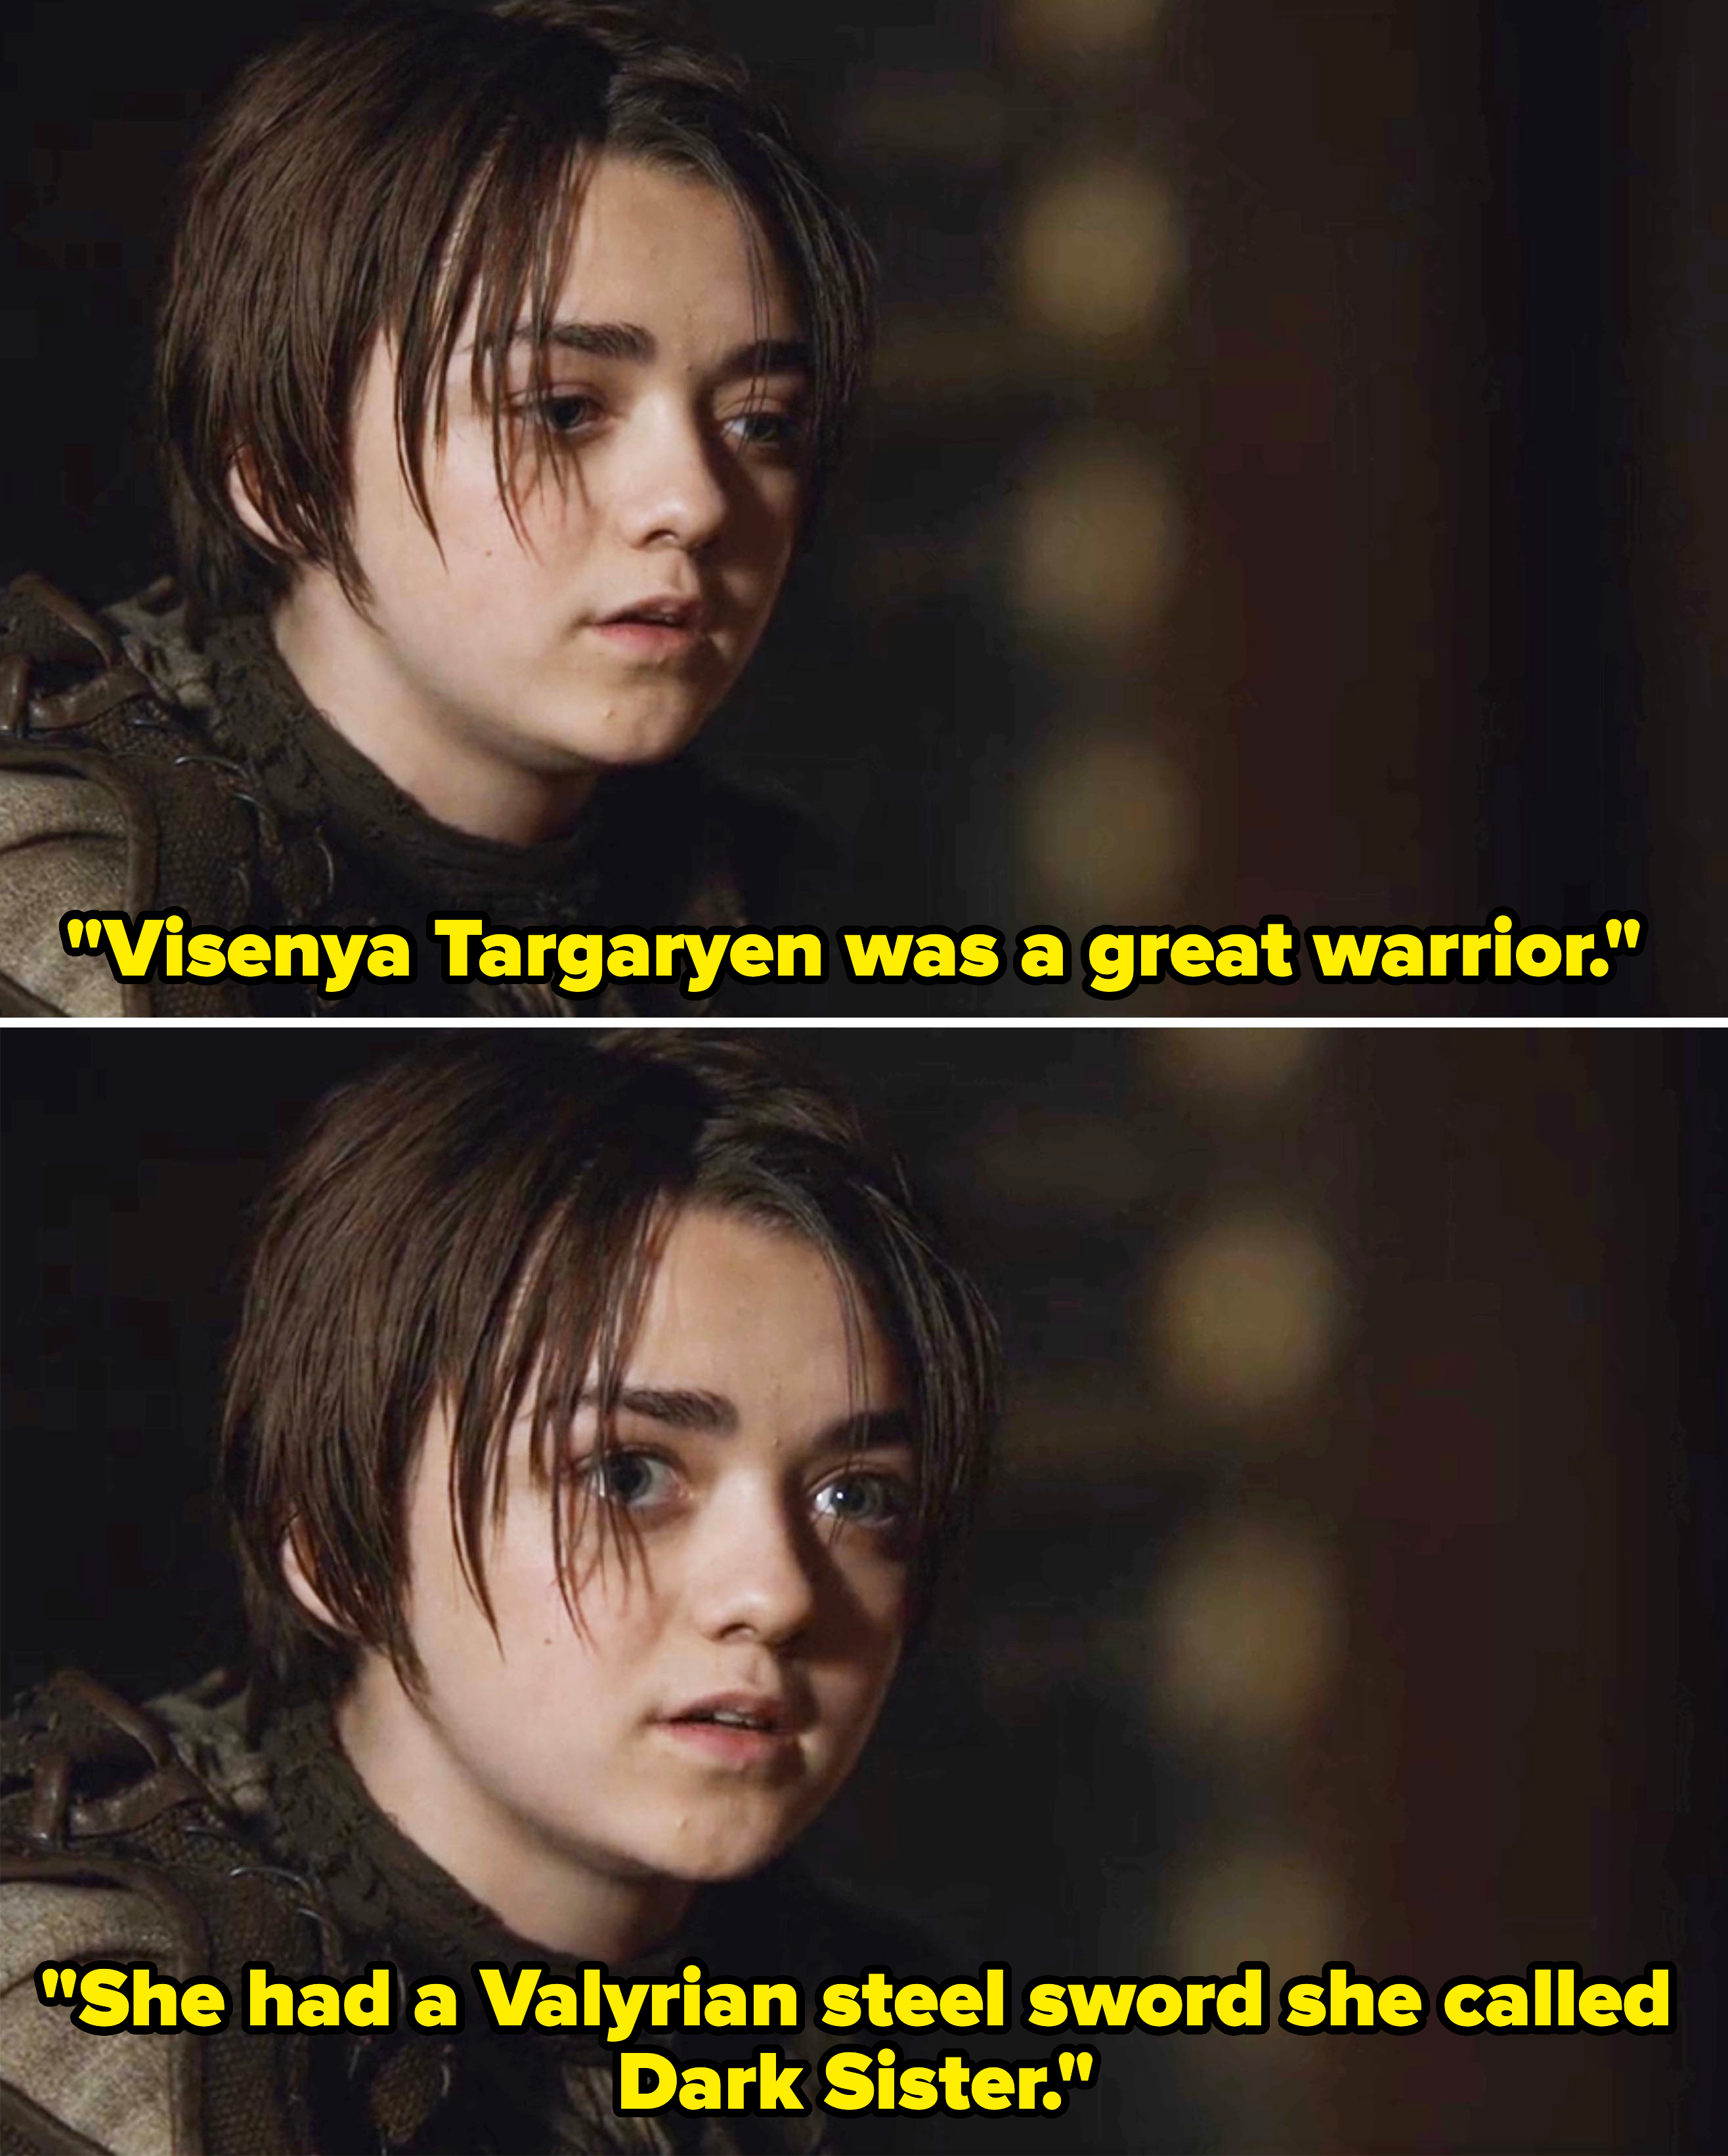 Two images of Maisie Williams as Arya Stark from the TV show Game of Thrones, showing her with short hair and a serious expression